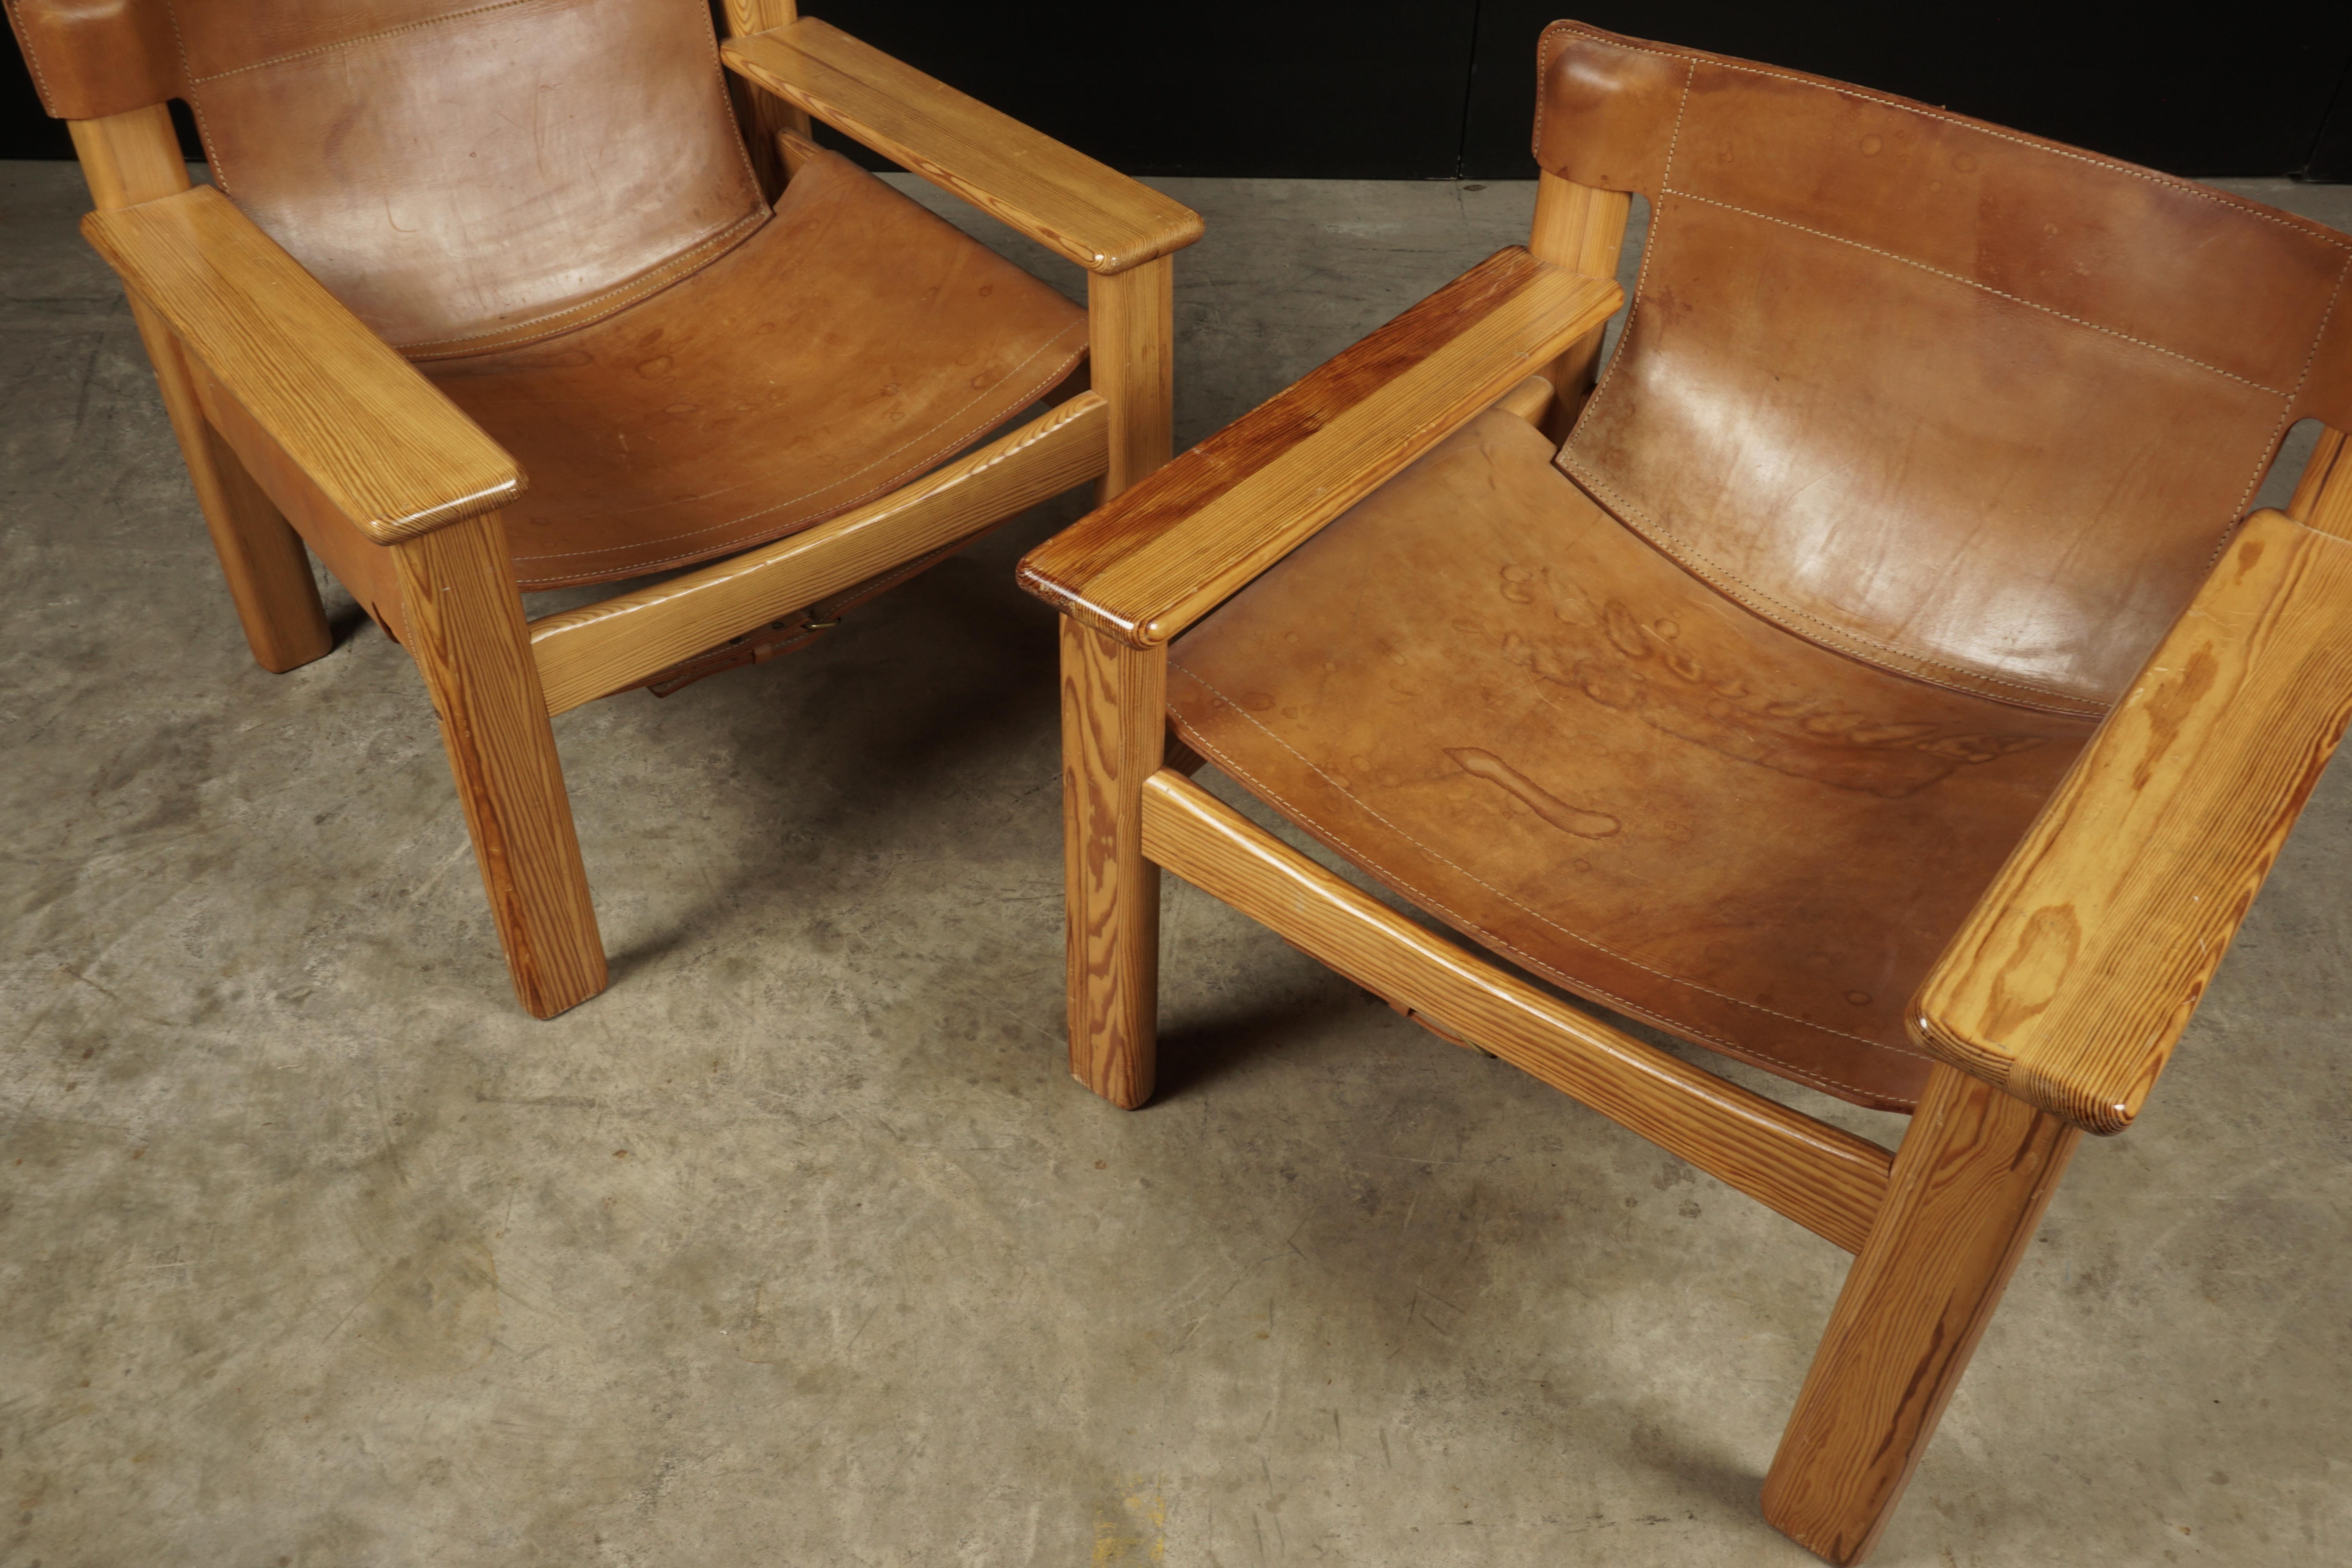 Late 20th Century Midcentury Pair of Spanish Style Chairs from Sweden, circa 1970